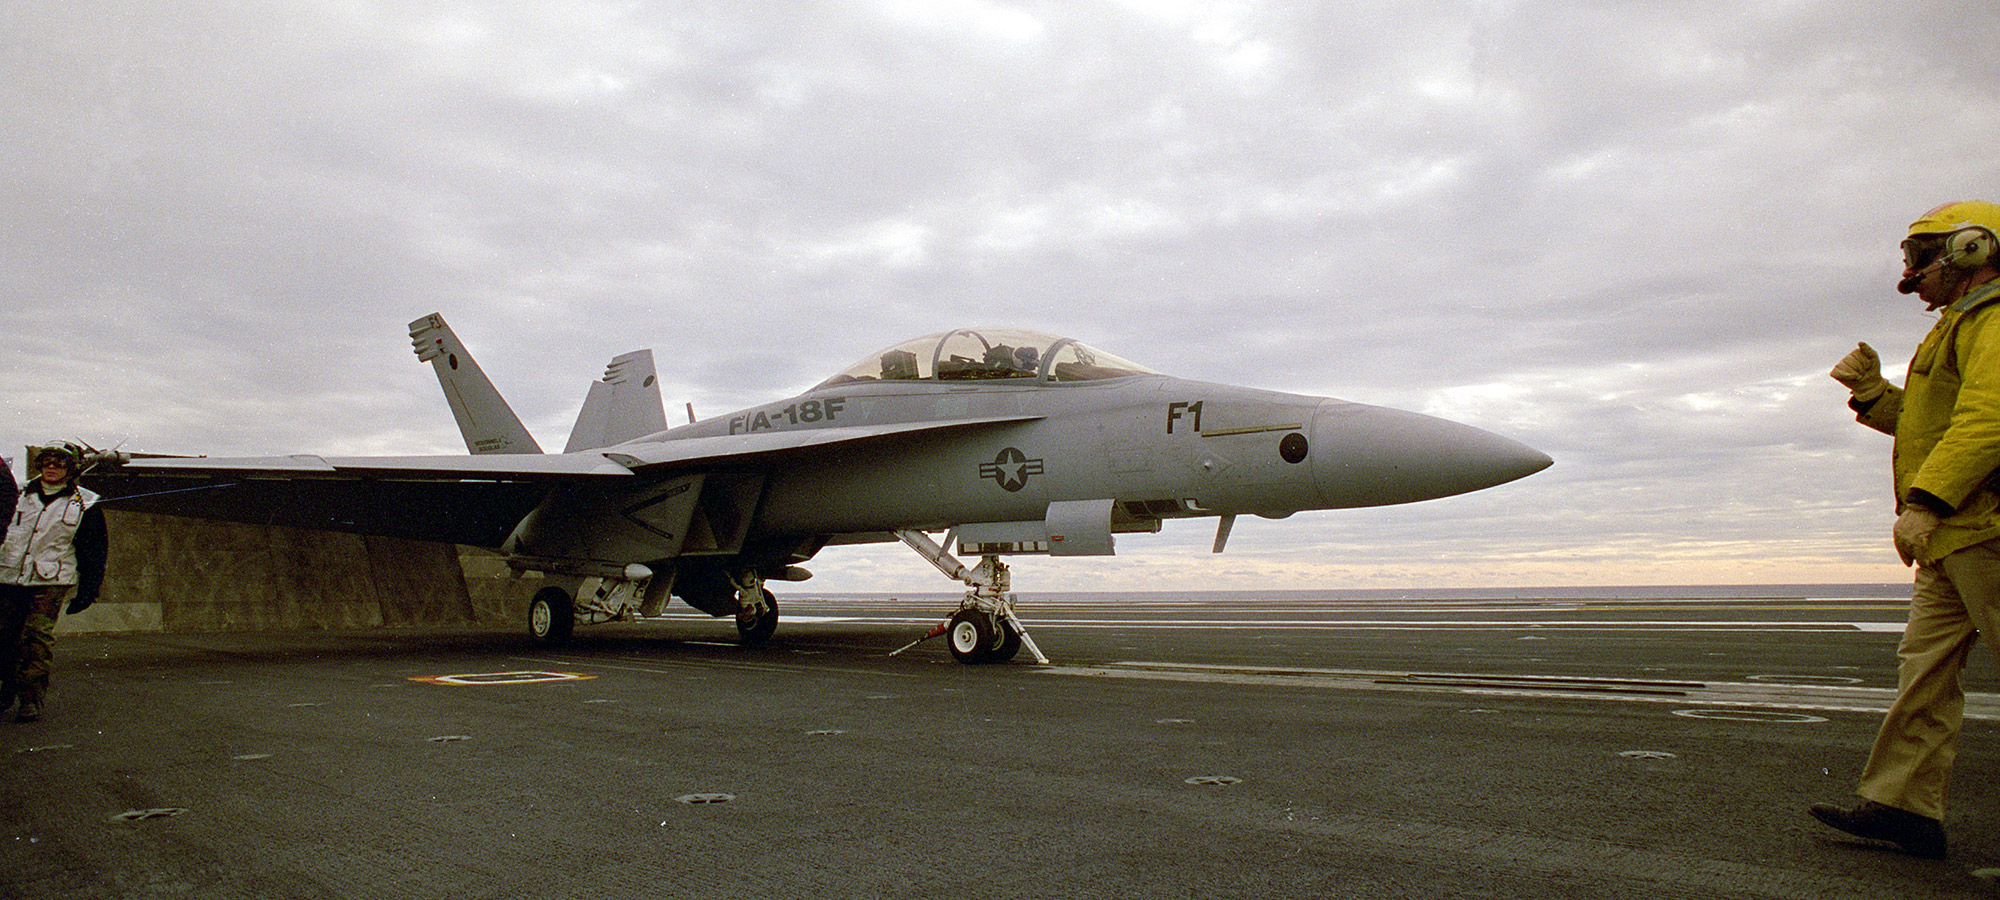 F/A-18 Super Hornet taking off from a aircraft carrier.